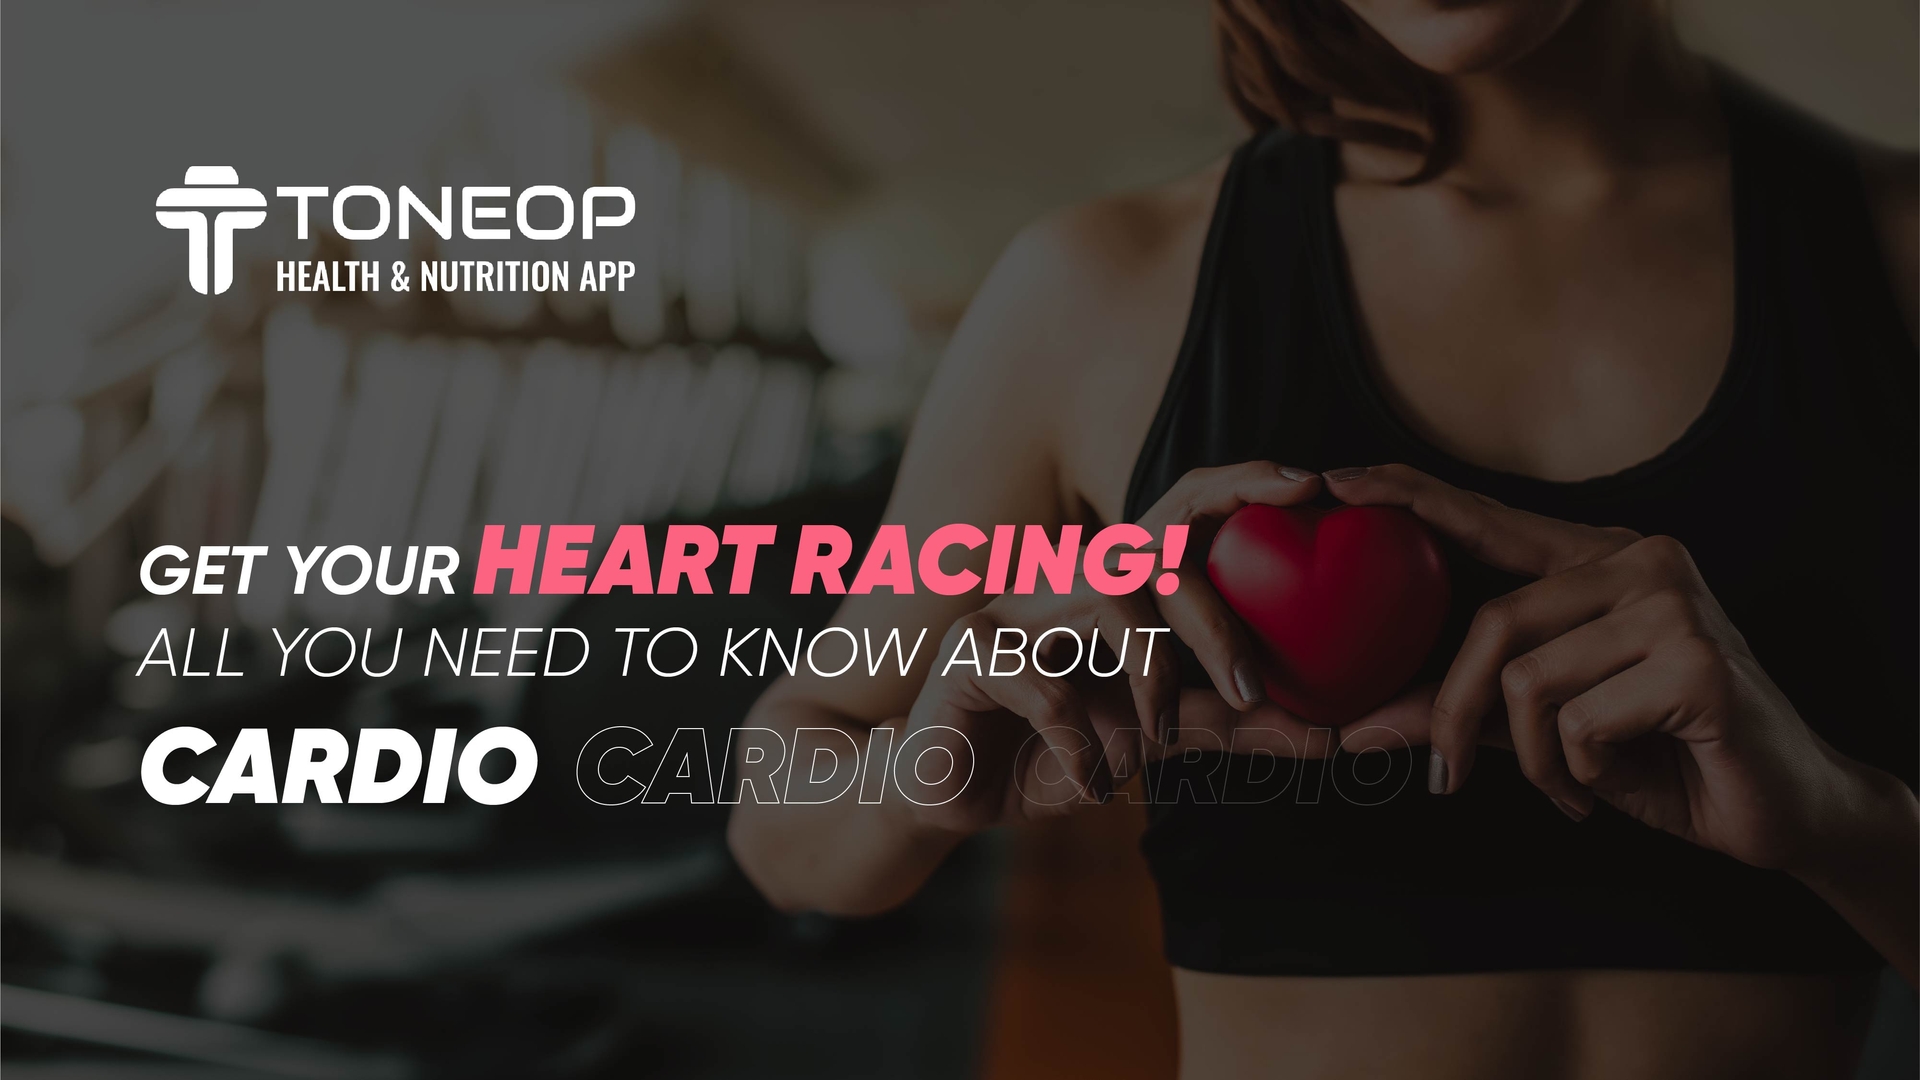 Get Your Heart Racing! All You Need to Know About Cardio